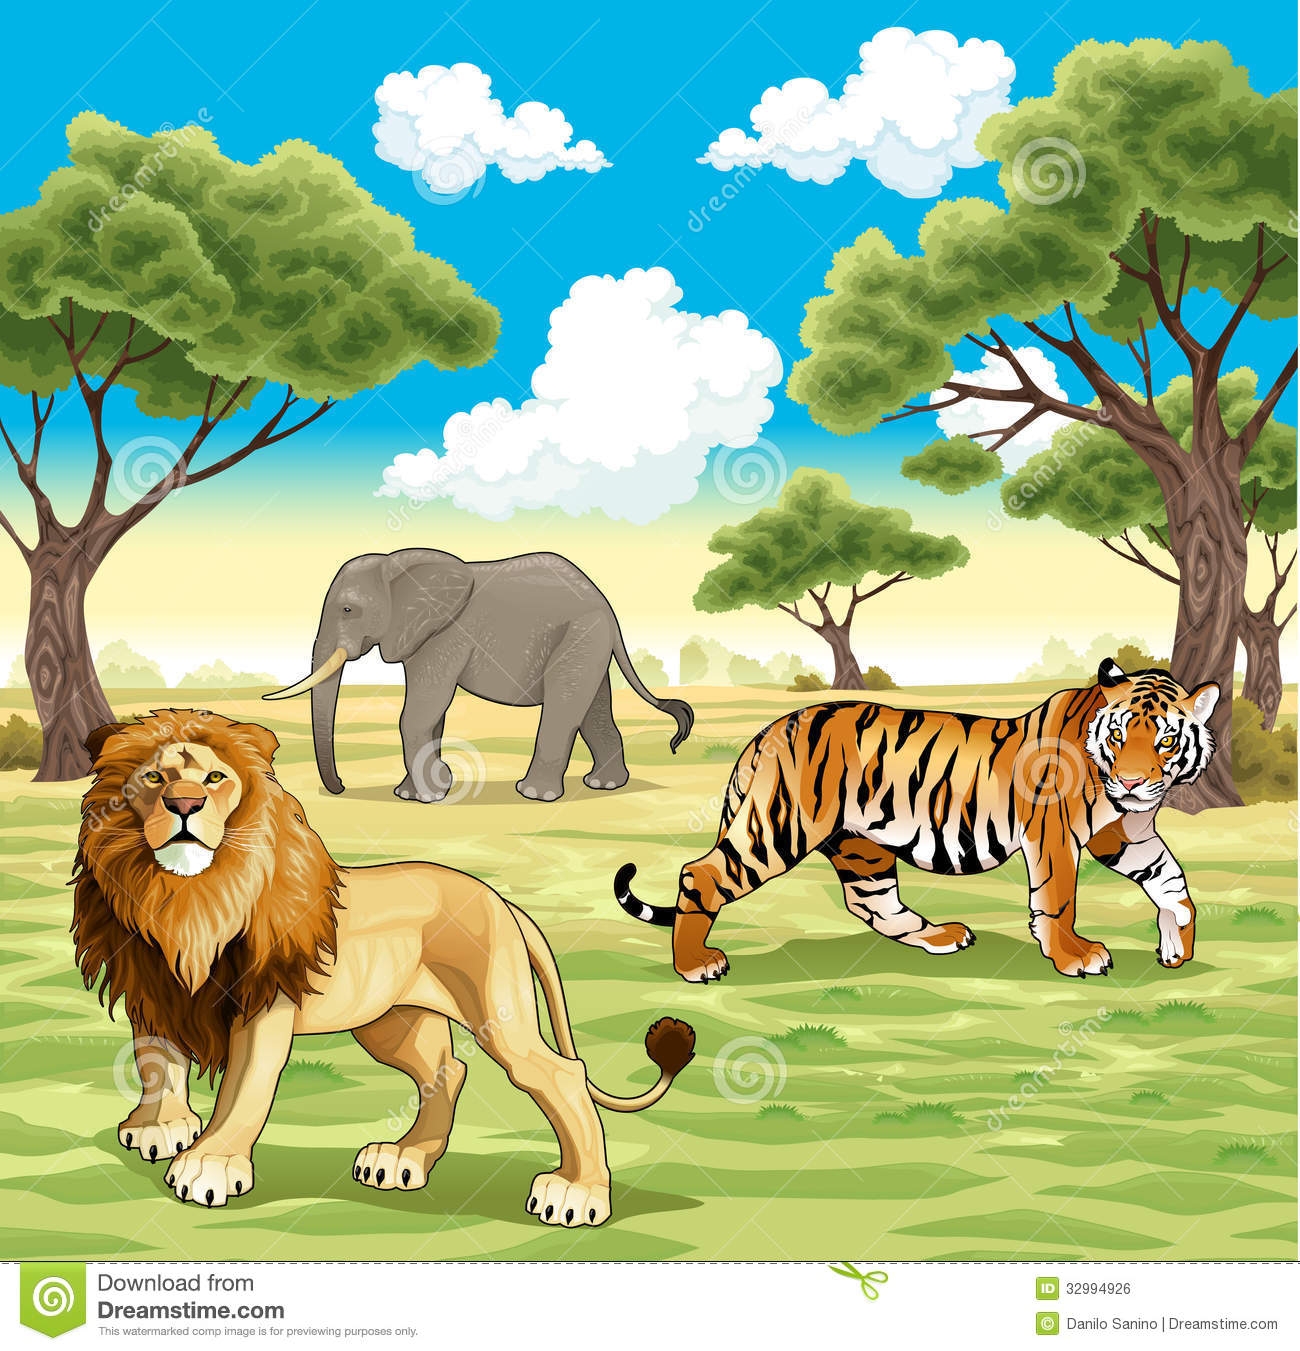 Nature animal clipart 20 free Cliparts | Download images ...